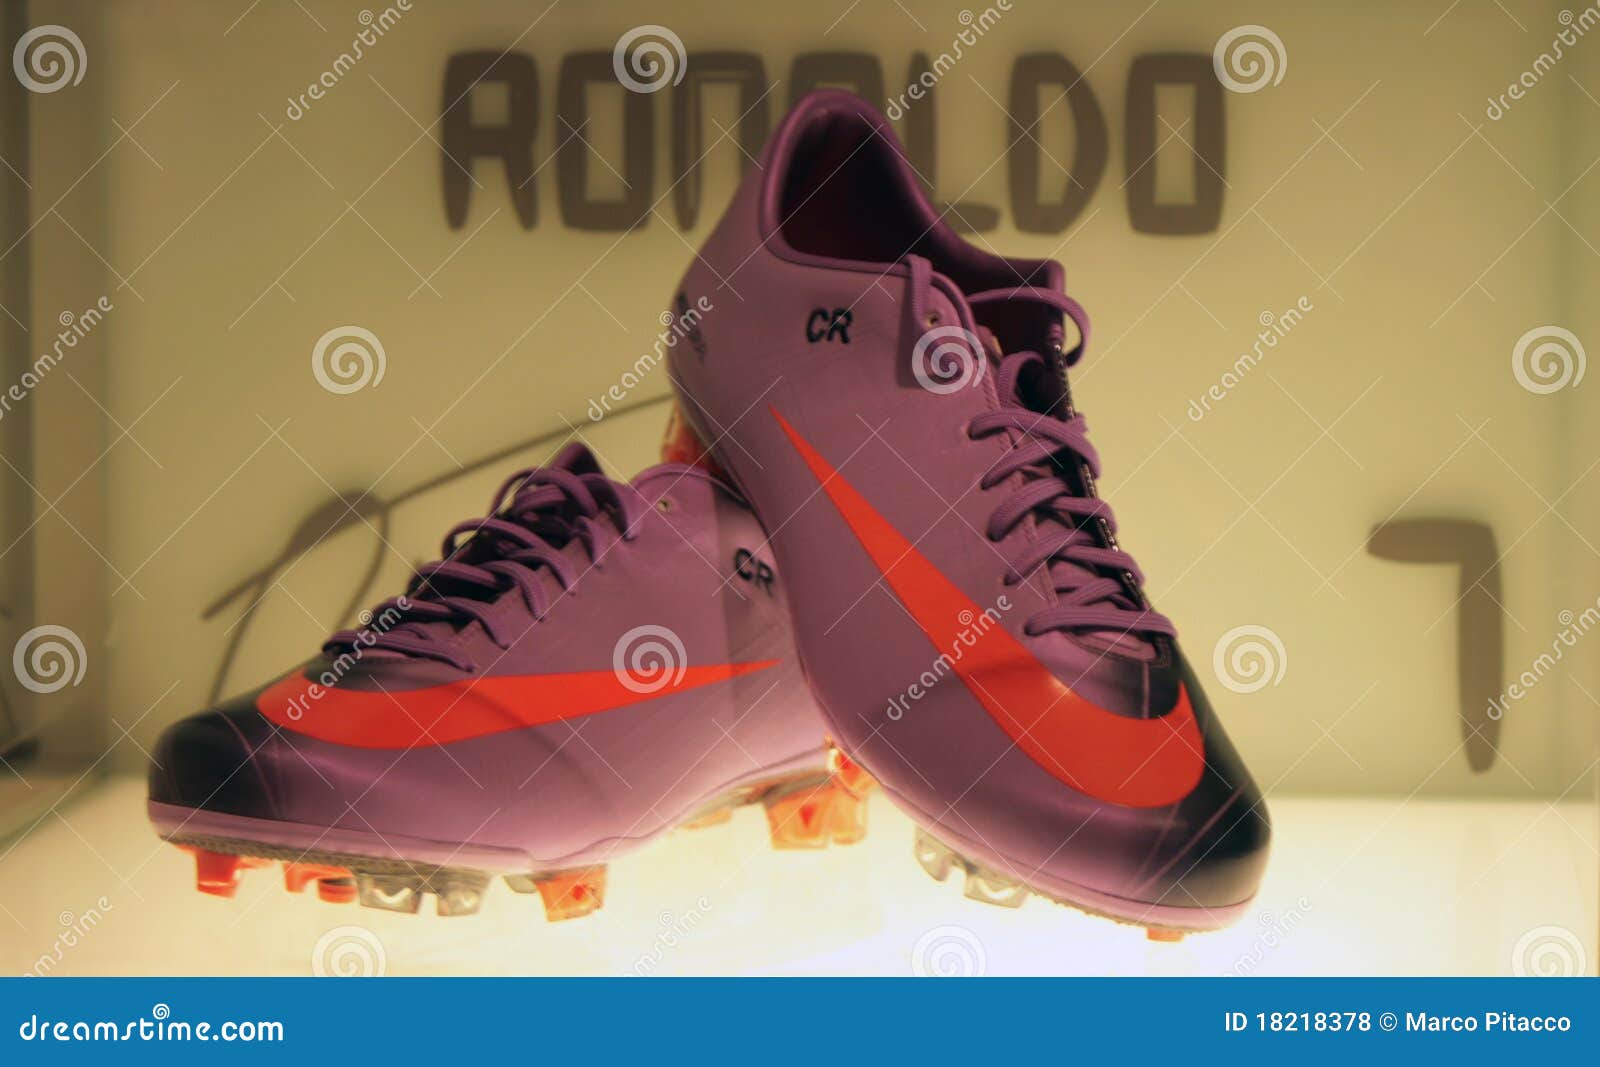 Ronaldo shoes- Buy shoes with free shipping on AliExpress